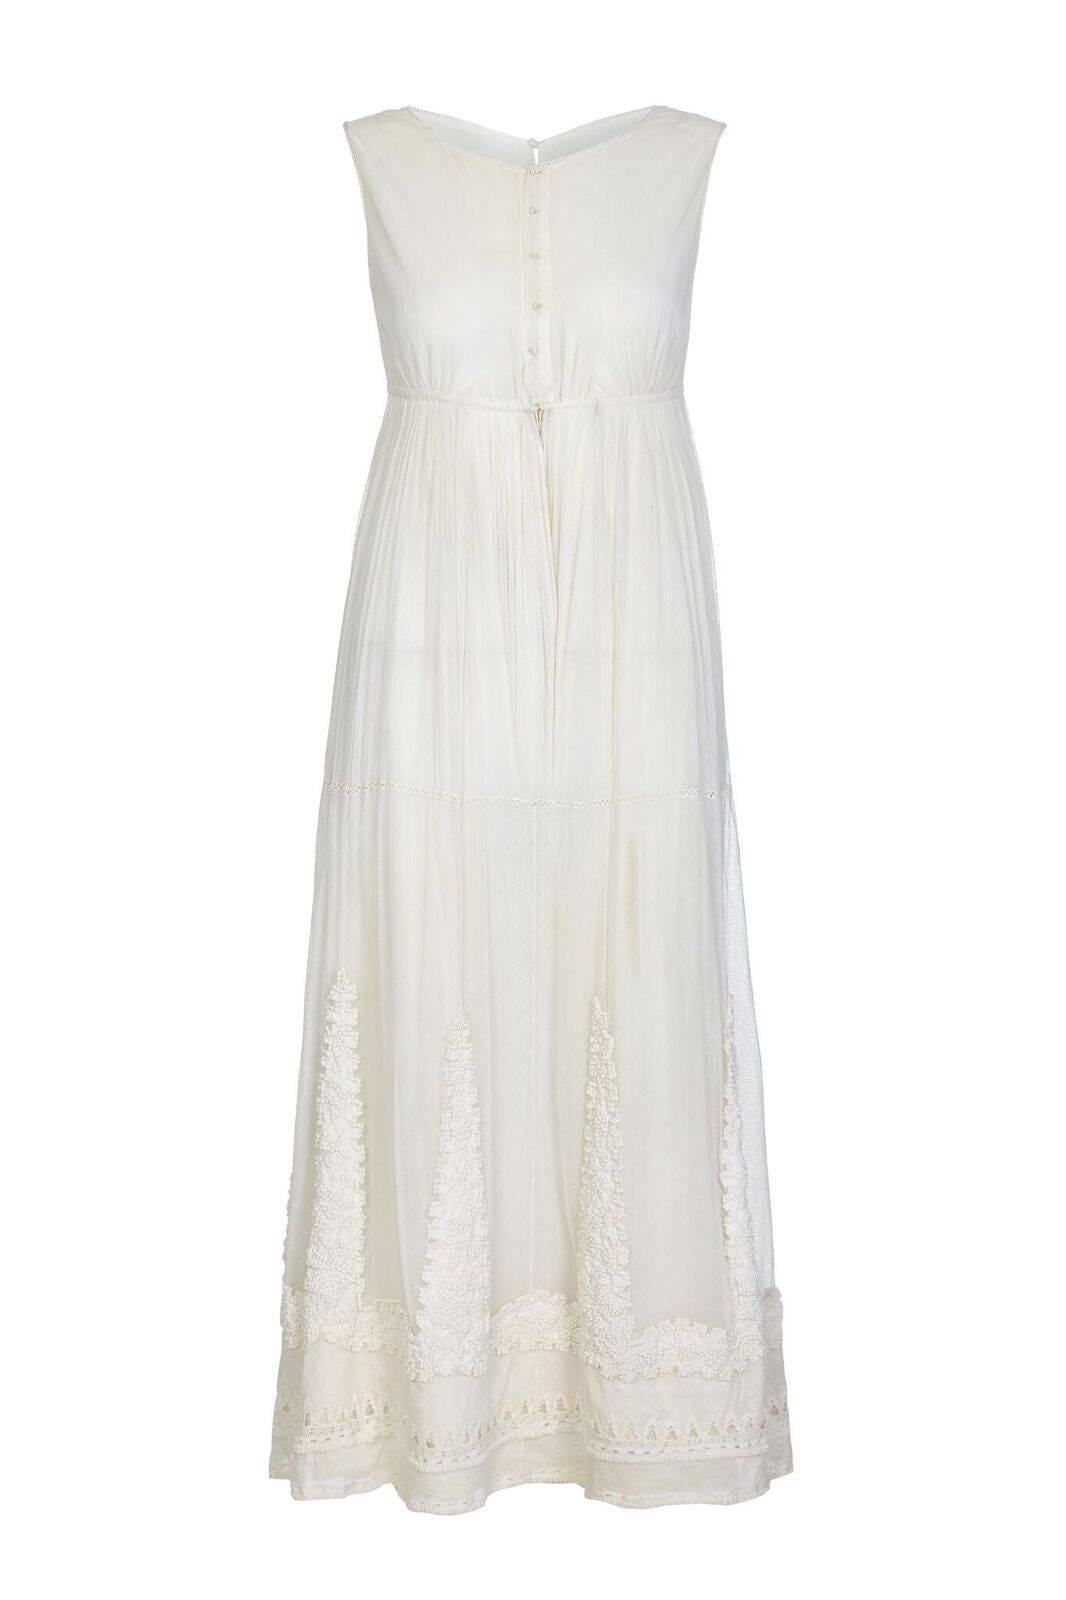 This enchanting Edwardian/Belle Epoque era antique bridal dress and matching tunic are in remarkable antique vintage condition and have been lovingly hand embroidered and knotted in extraordinary detail. The style reminds me of a Ballet Russe